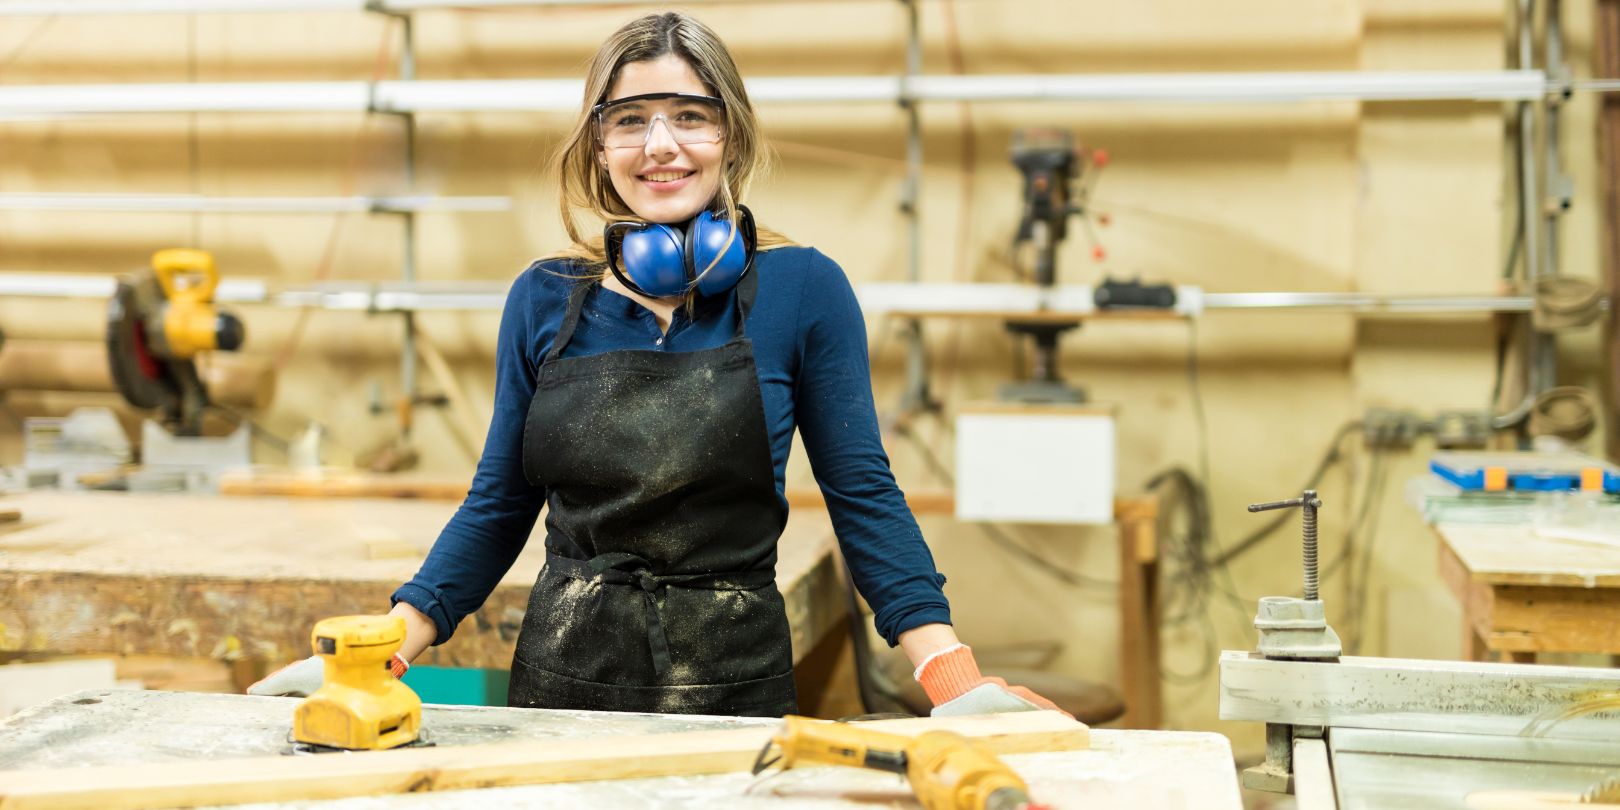 Portrait of a cute Hispanic female carpenter doing some work in a woodshop and smiling